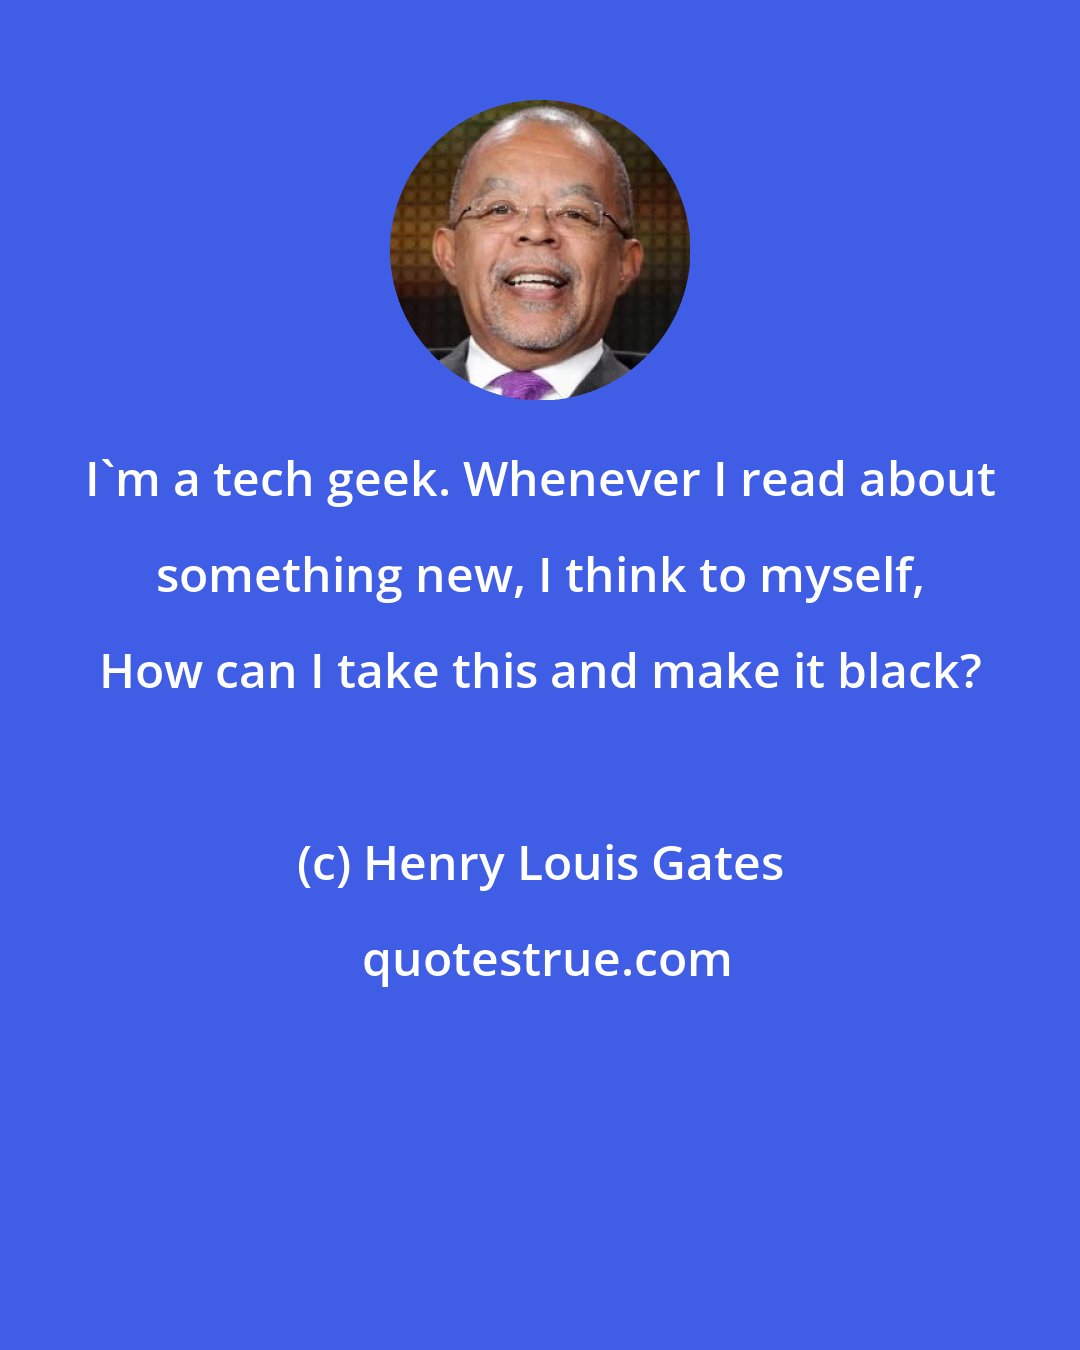 Henry Louis Gates: I'm a tech geek. Whenever I read about something new, I think to myself, How can I take this and make it black?